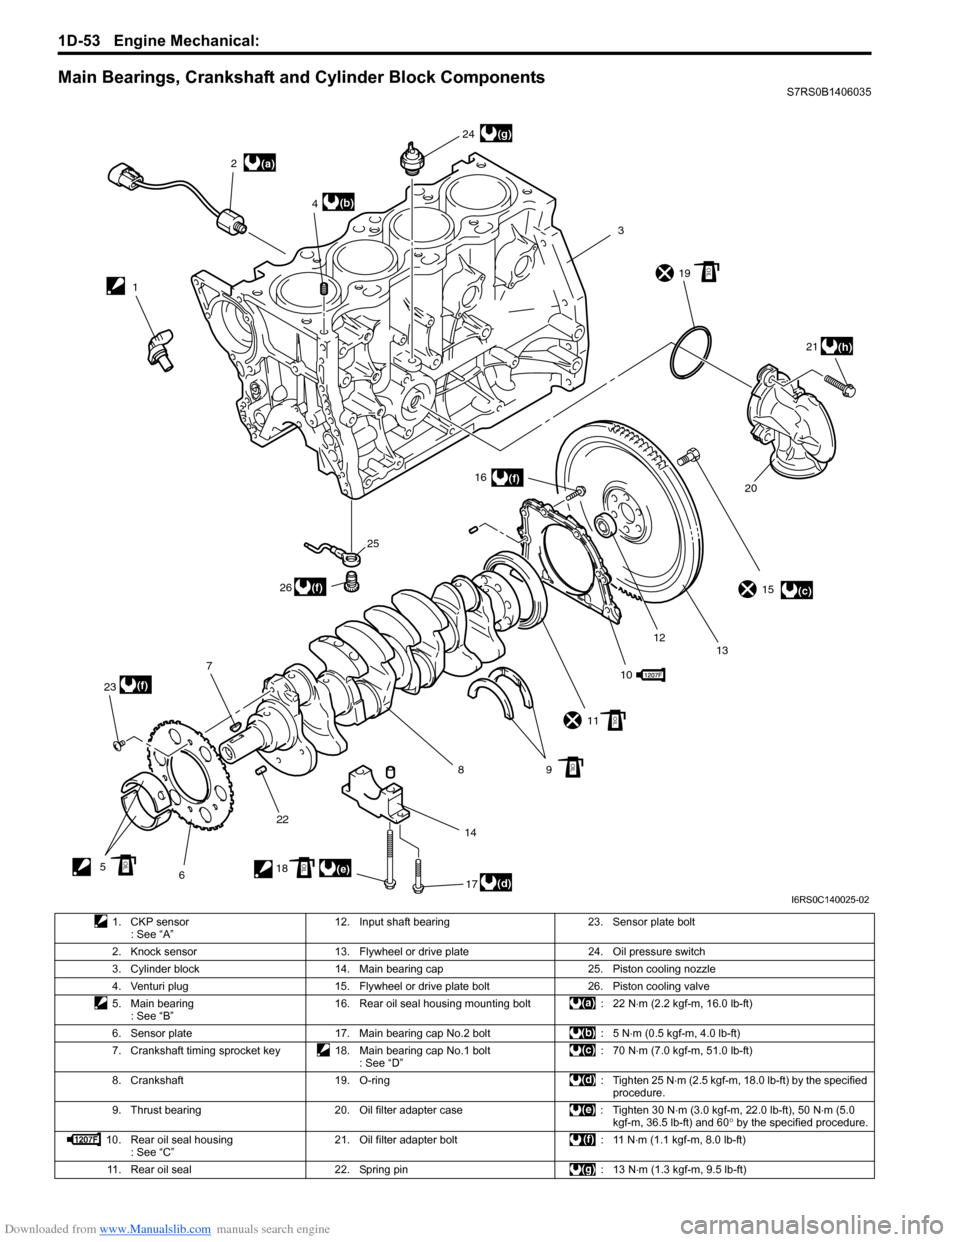 SUZUKI SWIFT 2006 2.G Service Workshop Manual Downloaded from www.Manualslib.com manuals search engine 1D-53 Engine Mechanical: 
Main Bearings, Crankshaft and Cylinder Block ComponentsS7RS0B1406035
(a)
(c)
(d)(e)
(b)
(f)
(f)
(f)
(g)
(h)
12
3
4
5 